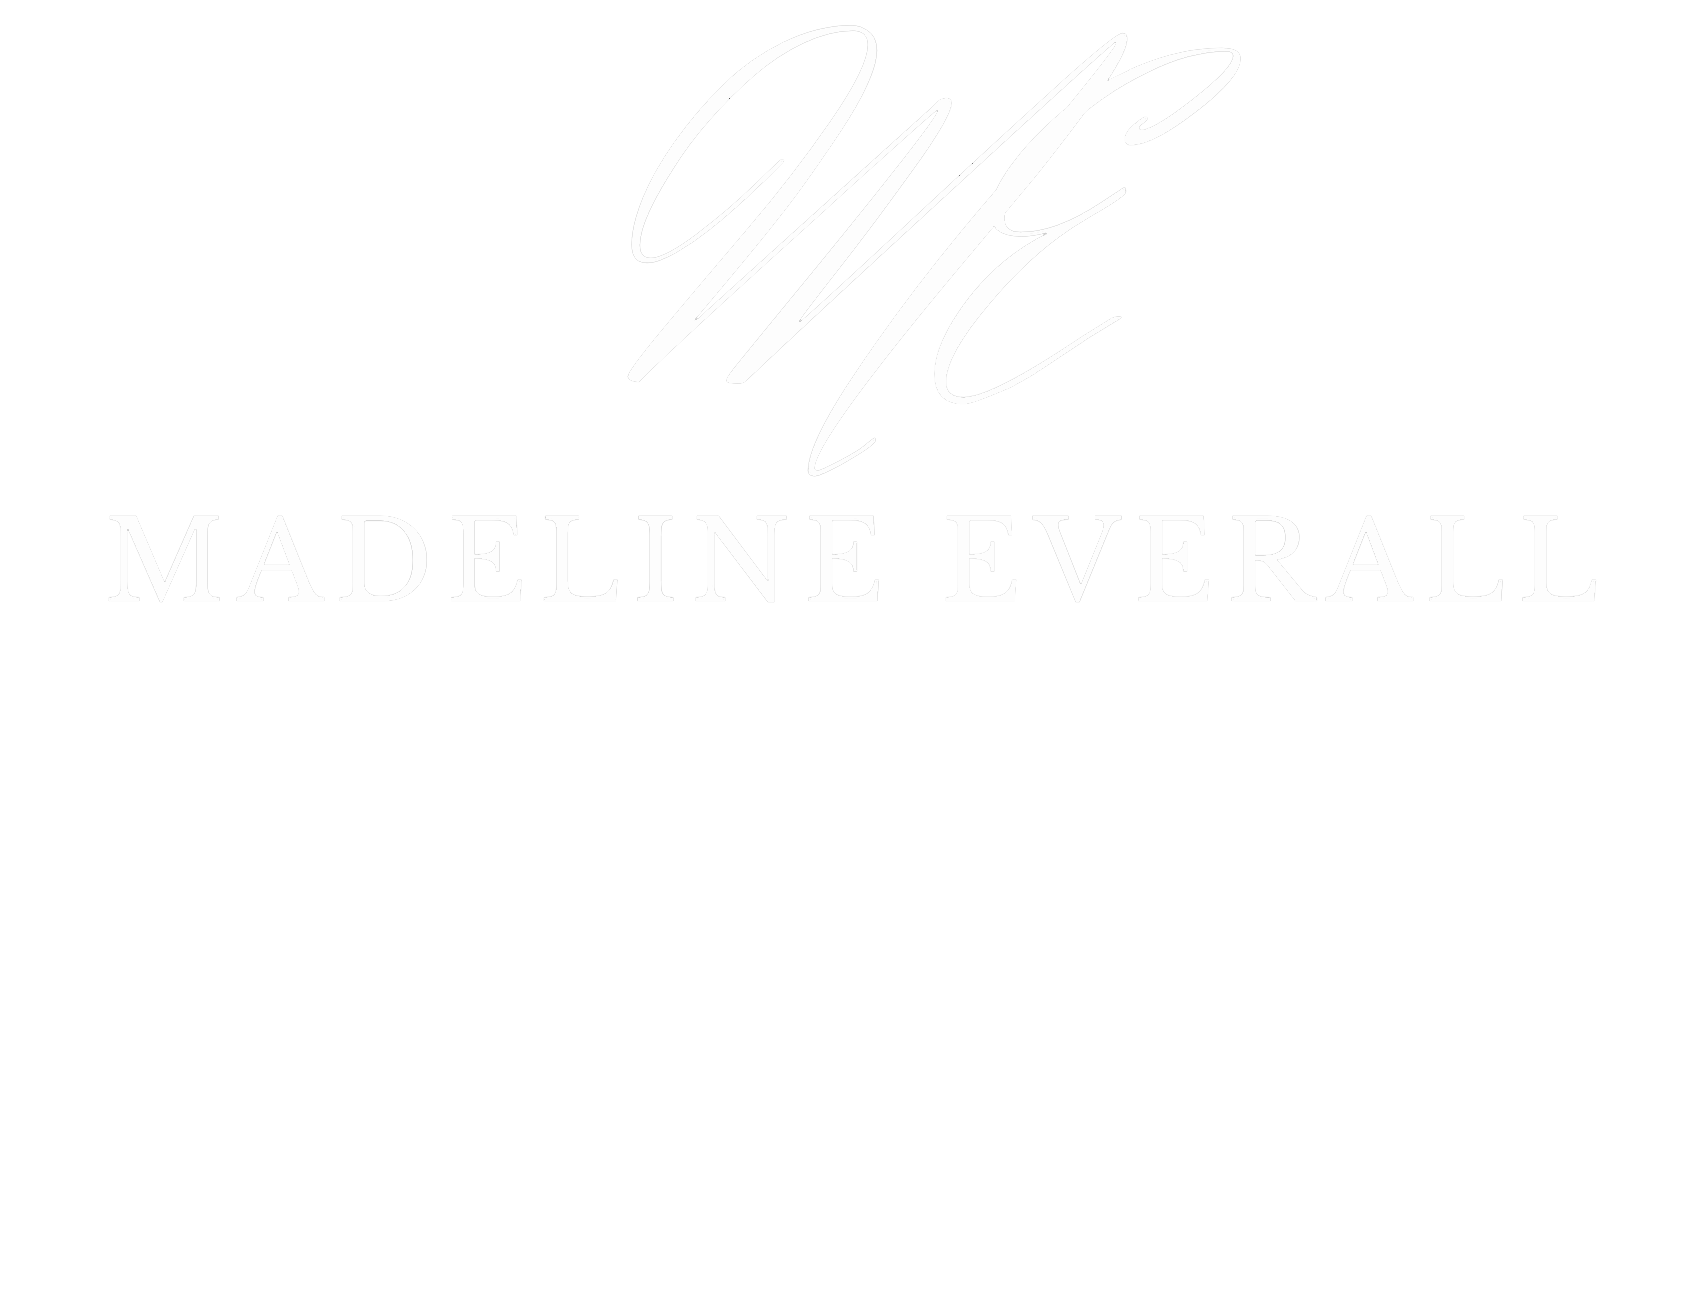 Madeline Everall